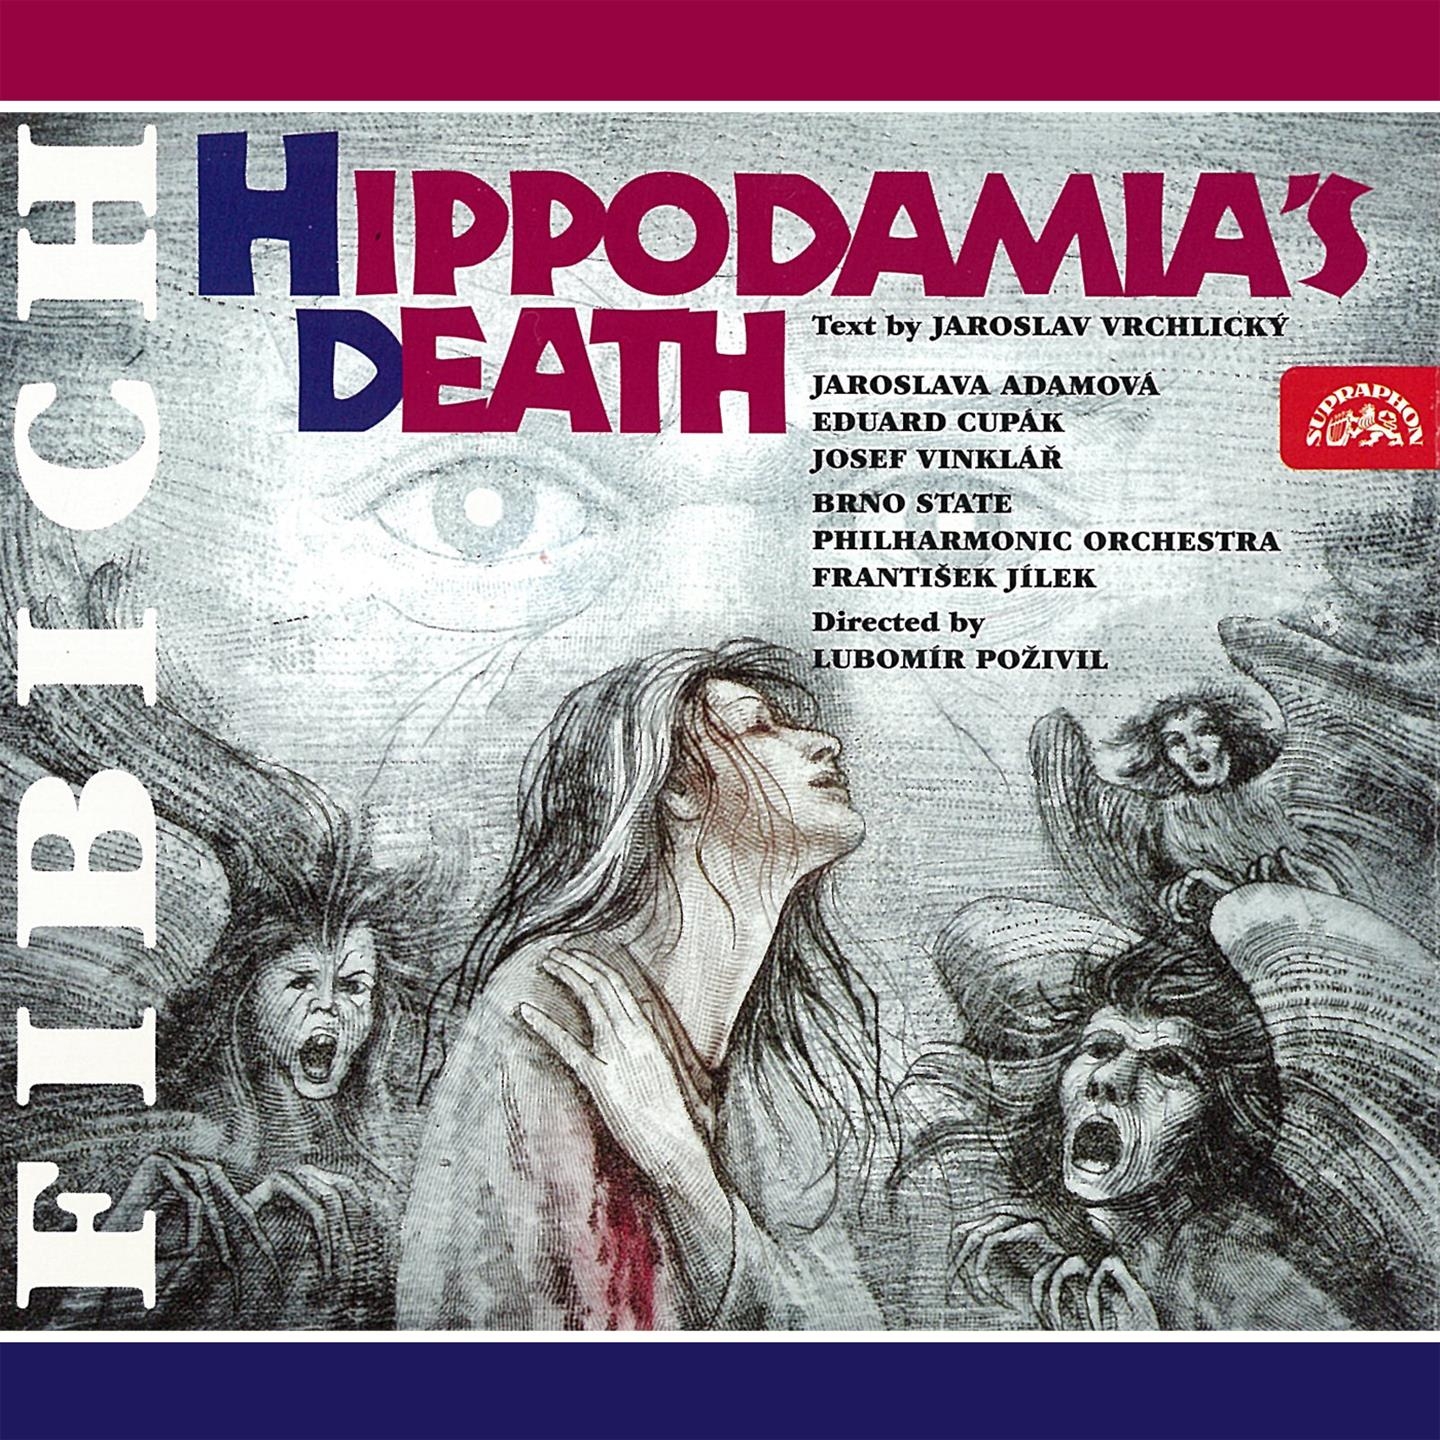 Hippodamia s Death, Op. 33, .: Act 4  Scene Two: Good, take me to the table